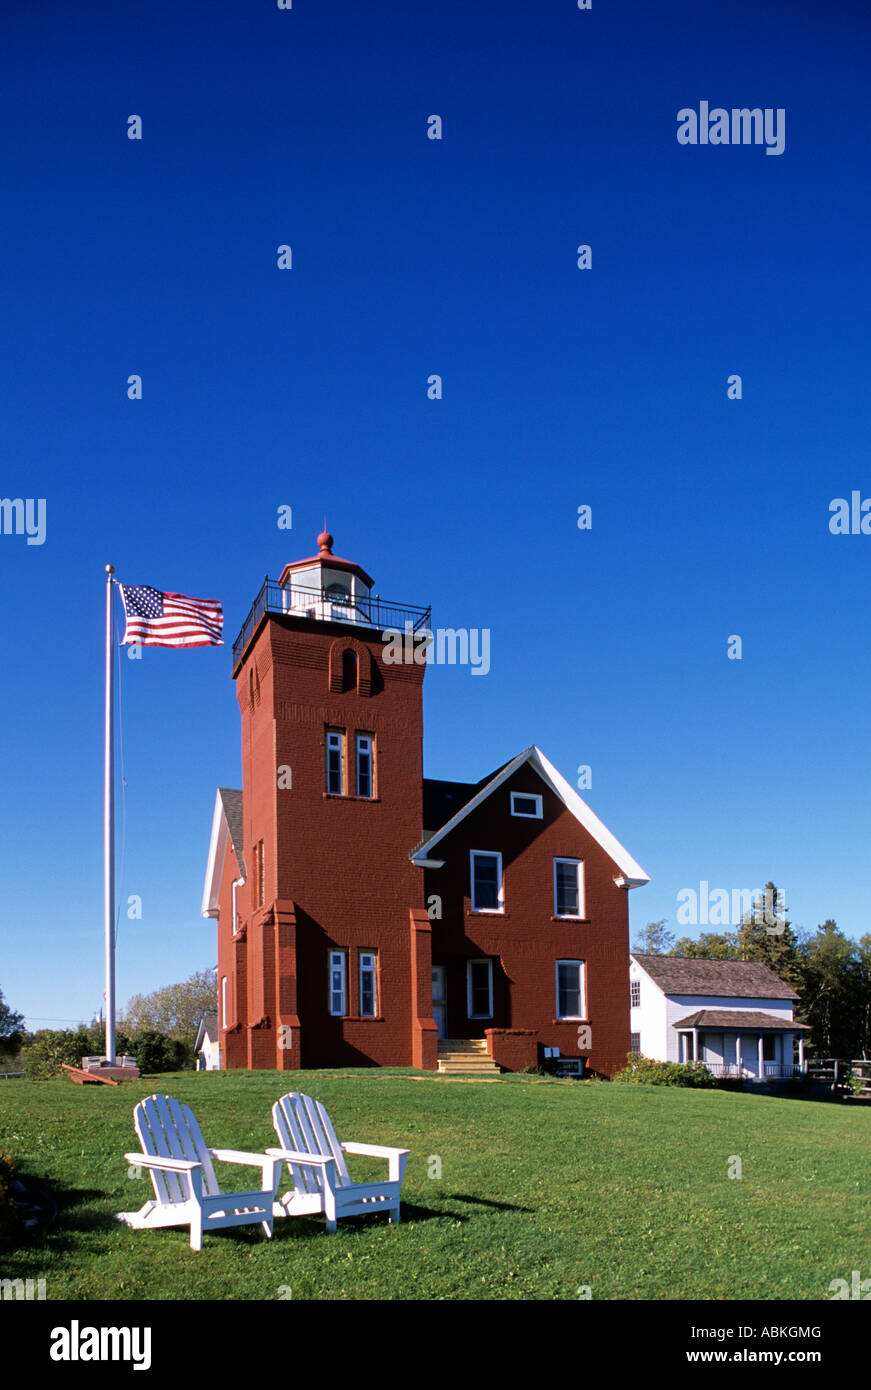 AGATE BAY LIGHT STATION (1892) IN TWO HARBORS, N.E. MINNESOTA. ON THE SHORE OF LAKE SUPERIOR, U.S.A.  FALL. Stock Photo